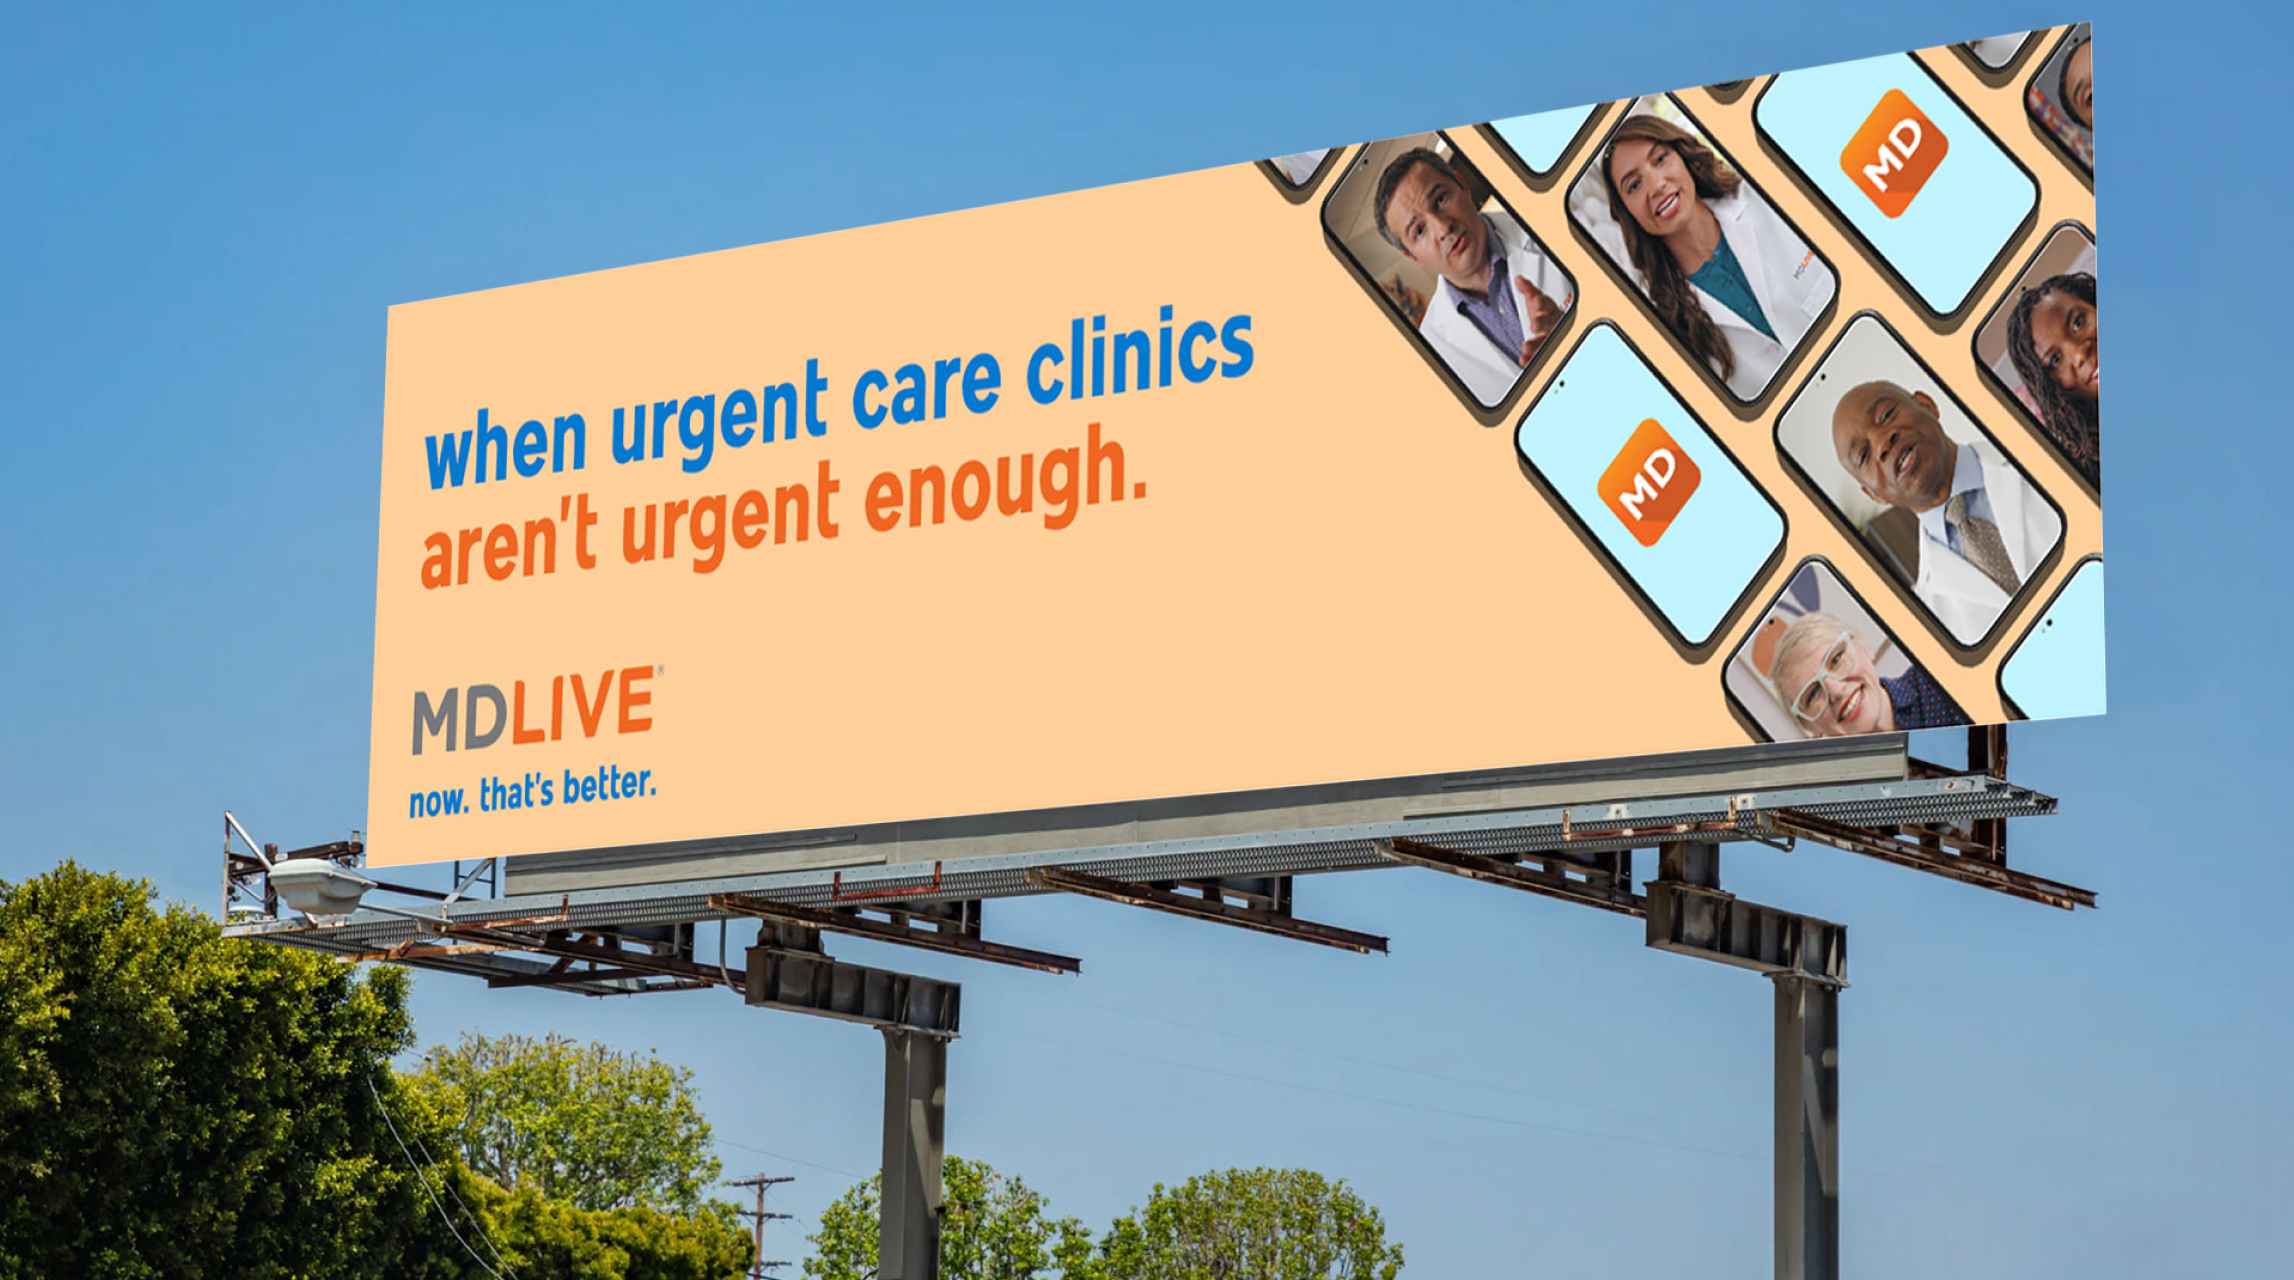 Photograph of an MDLIVE billboard.